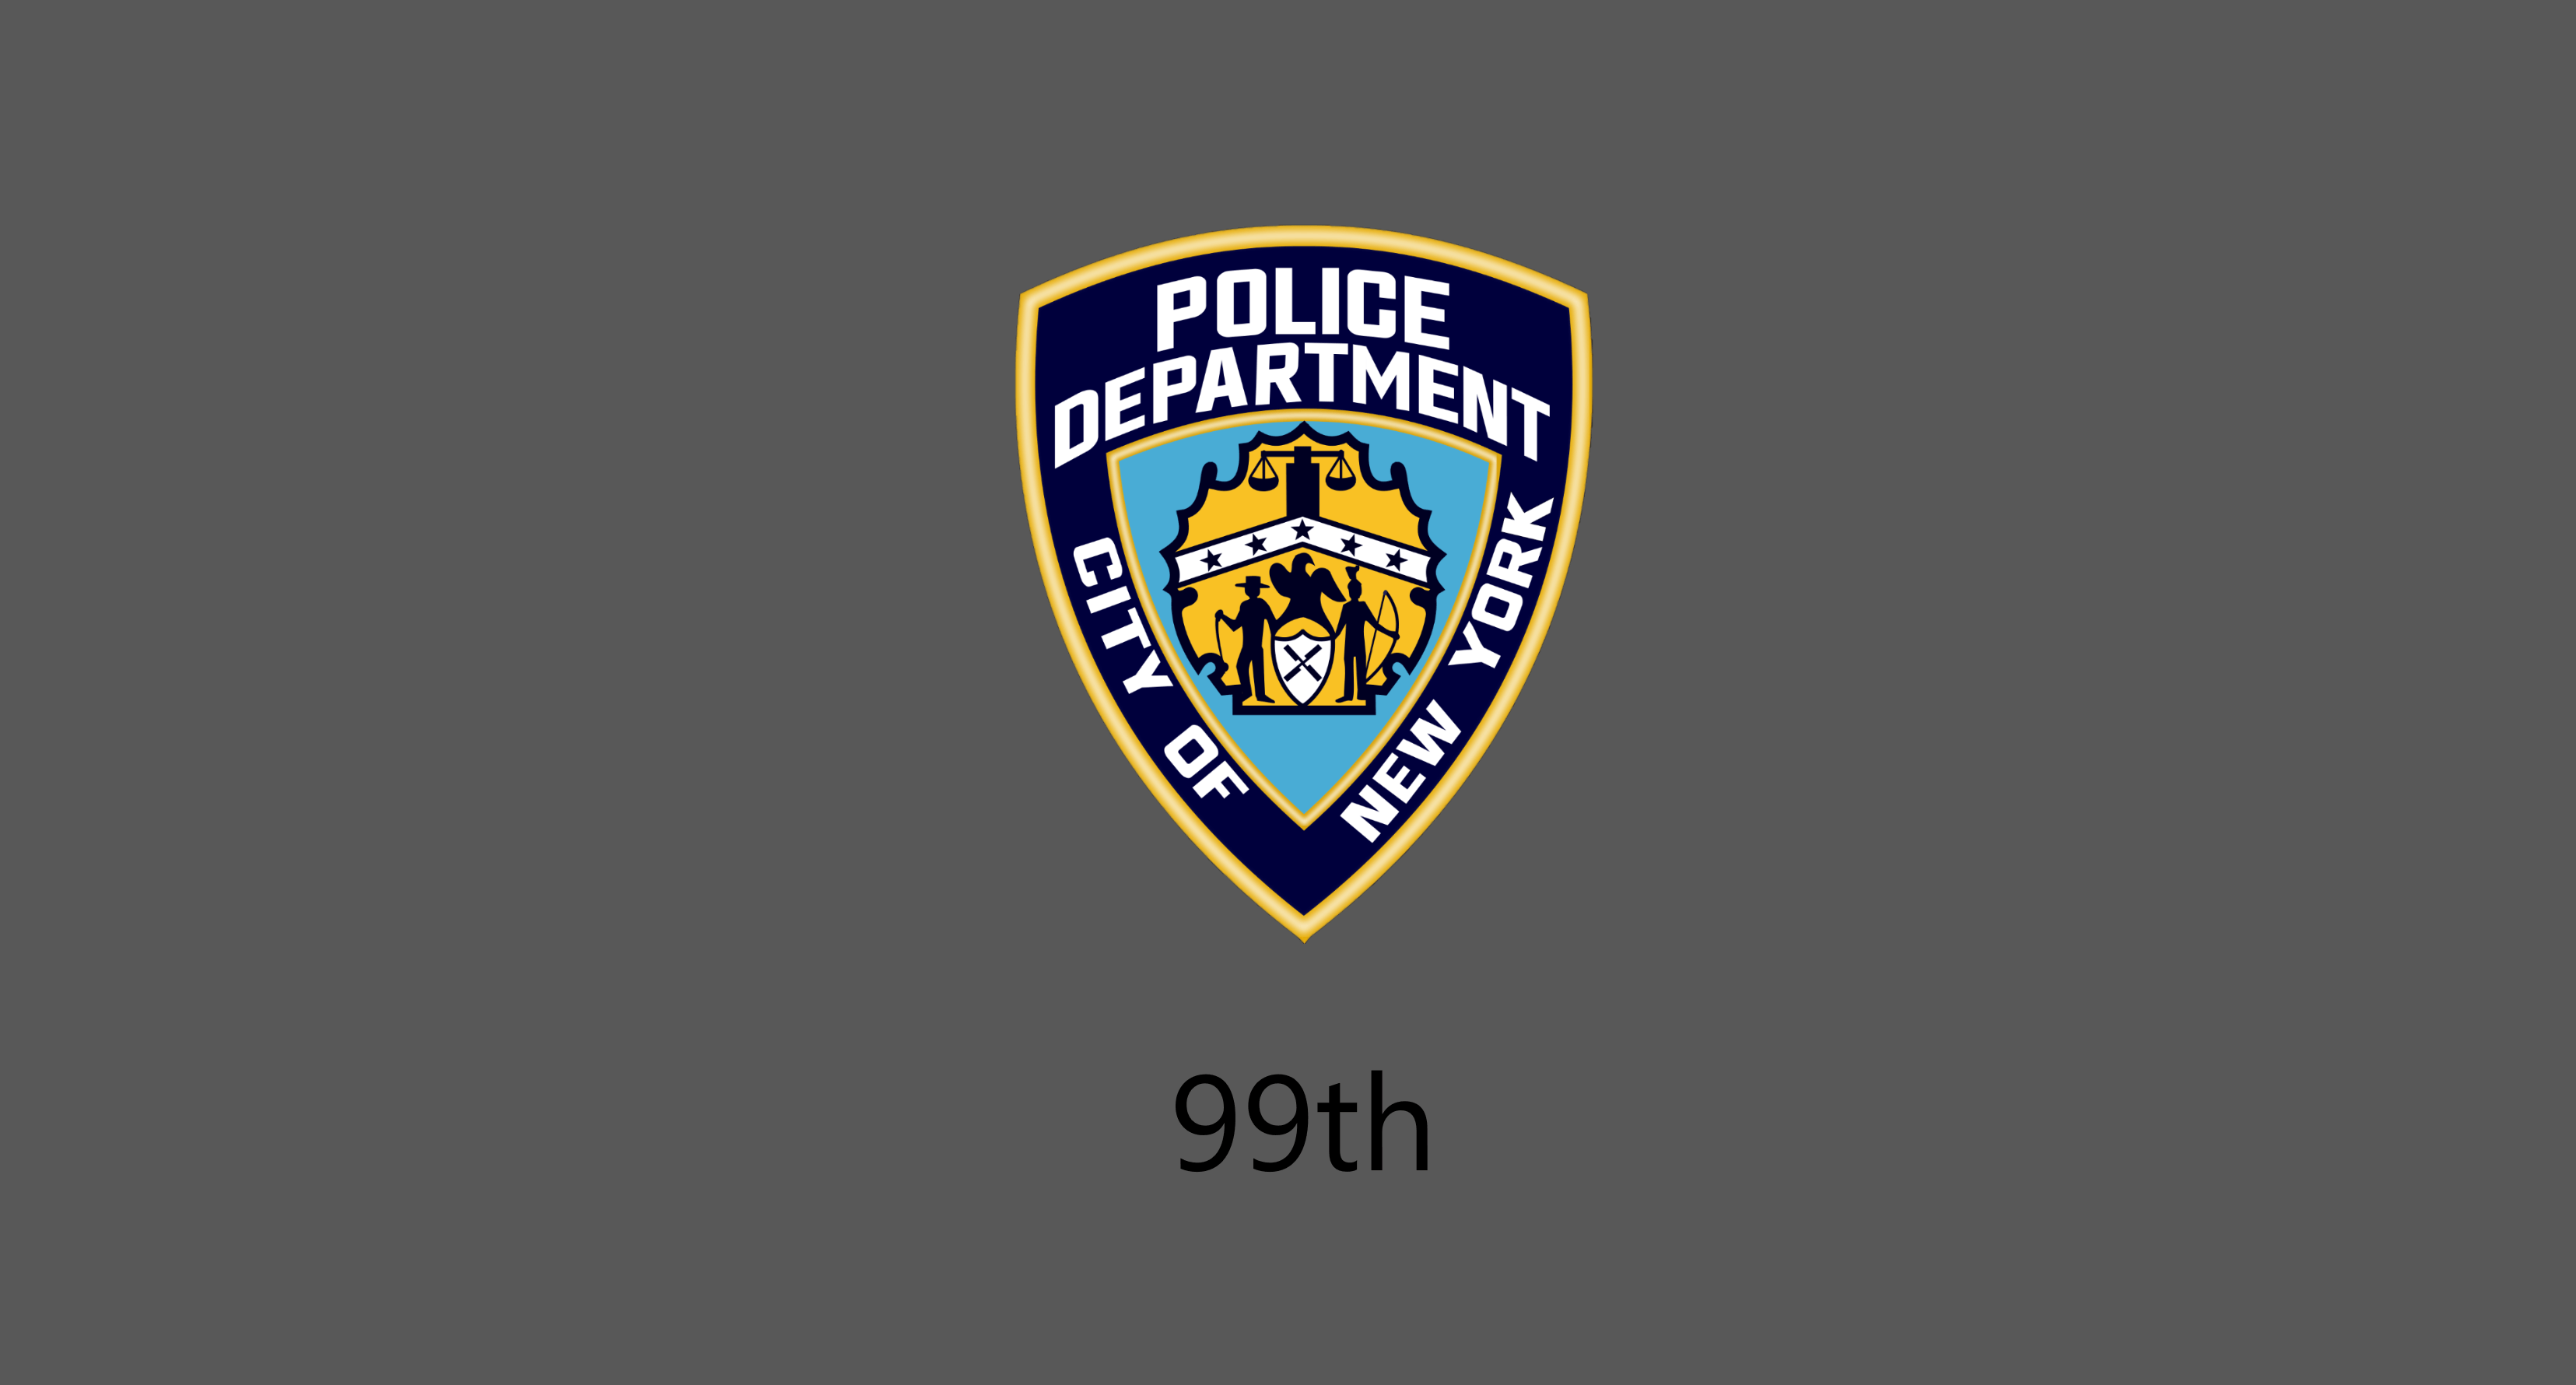 I made the wallpaper seen on every single NYPD screen